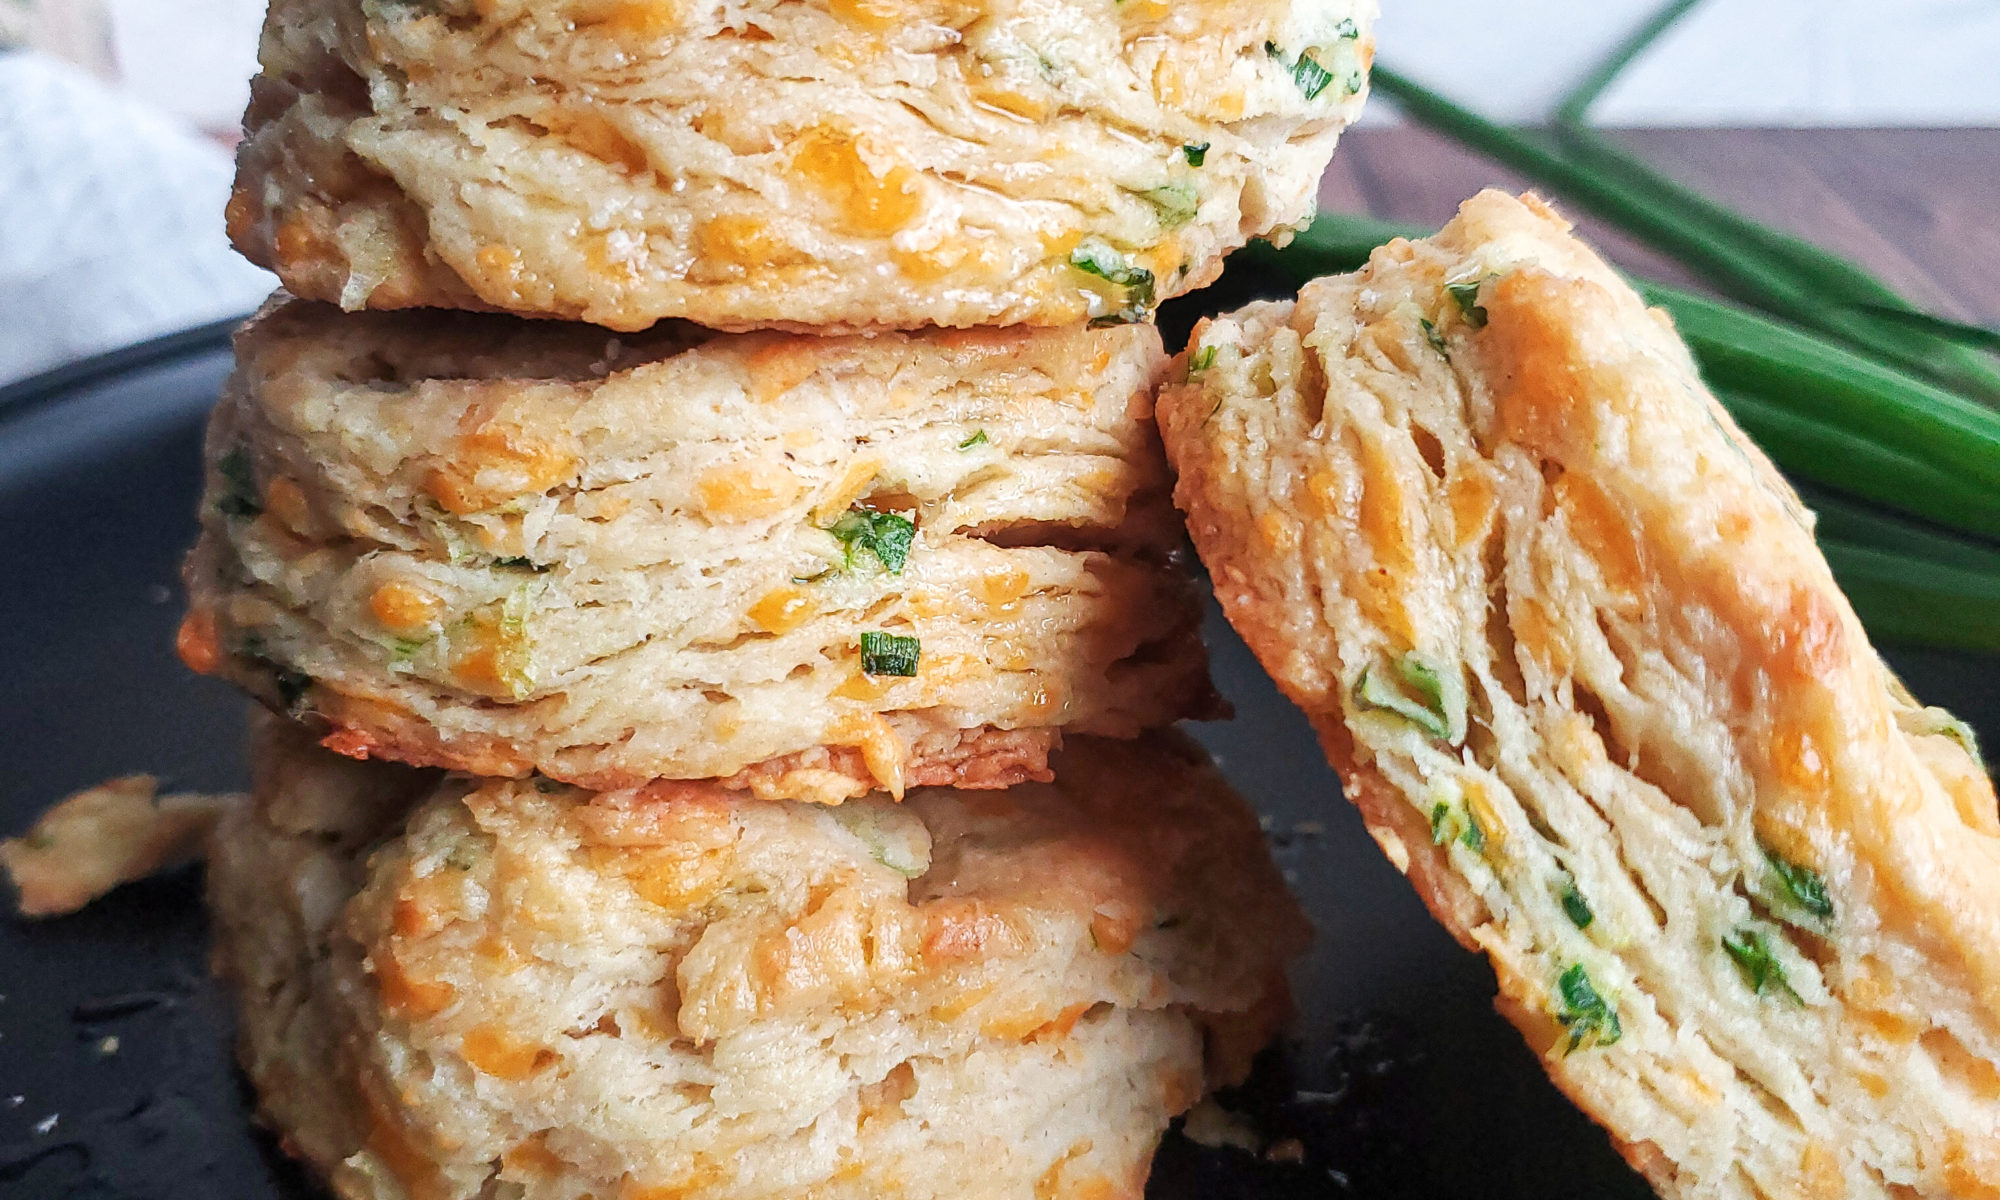 Cheddar scallion biscuits on a plate